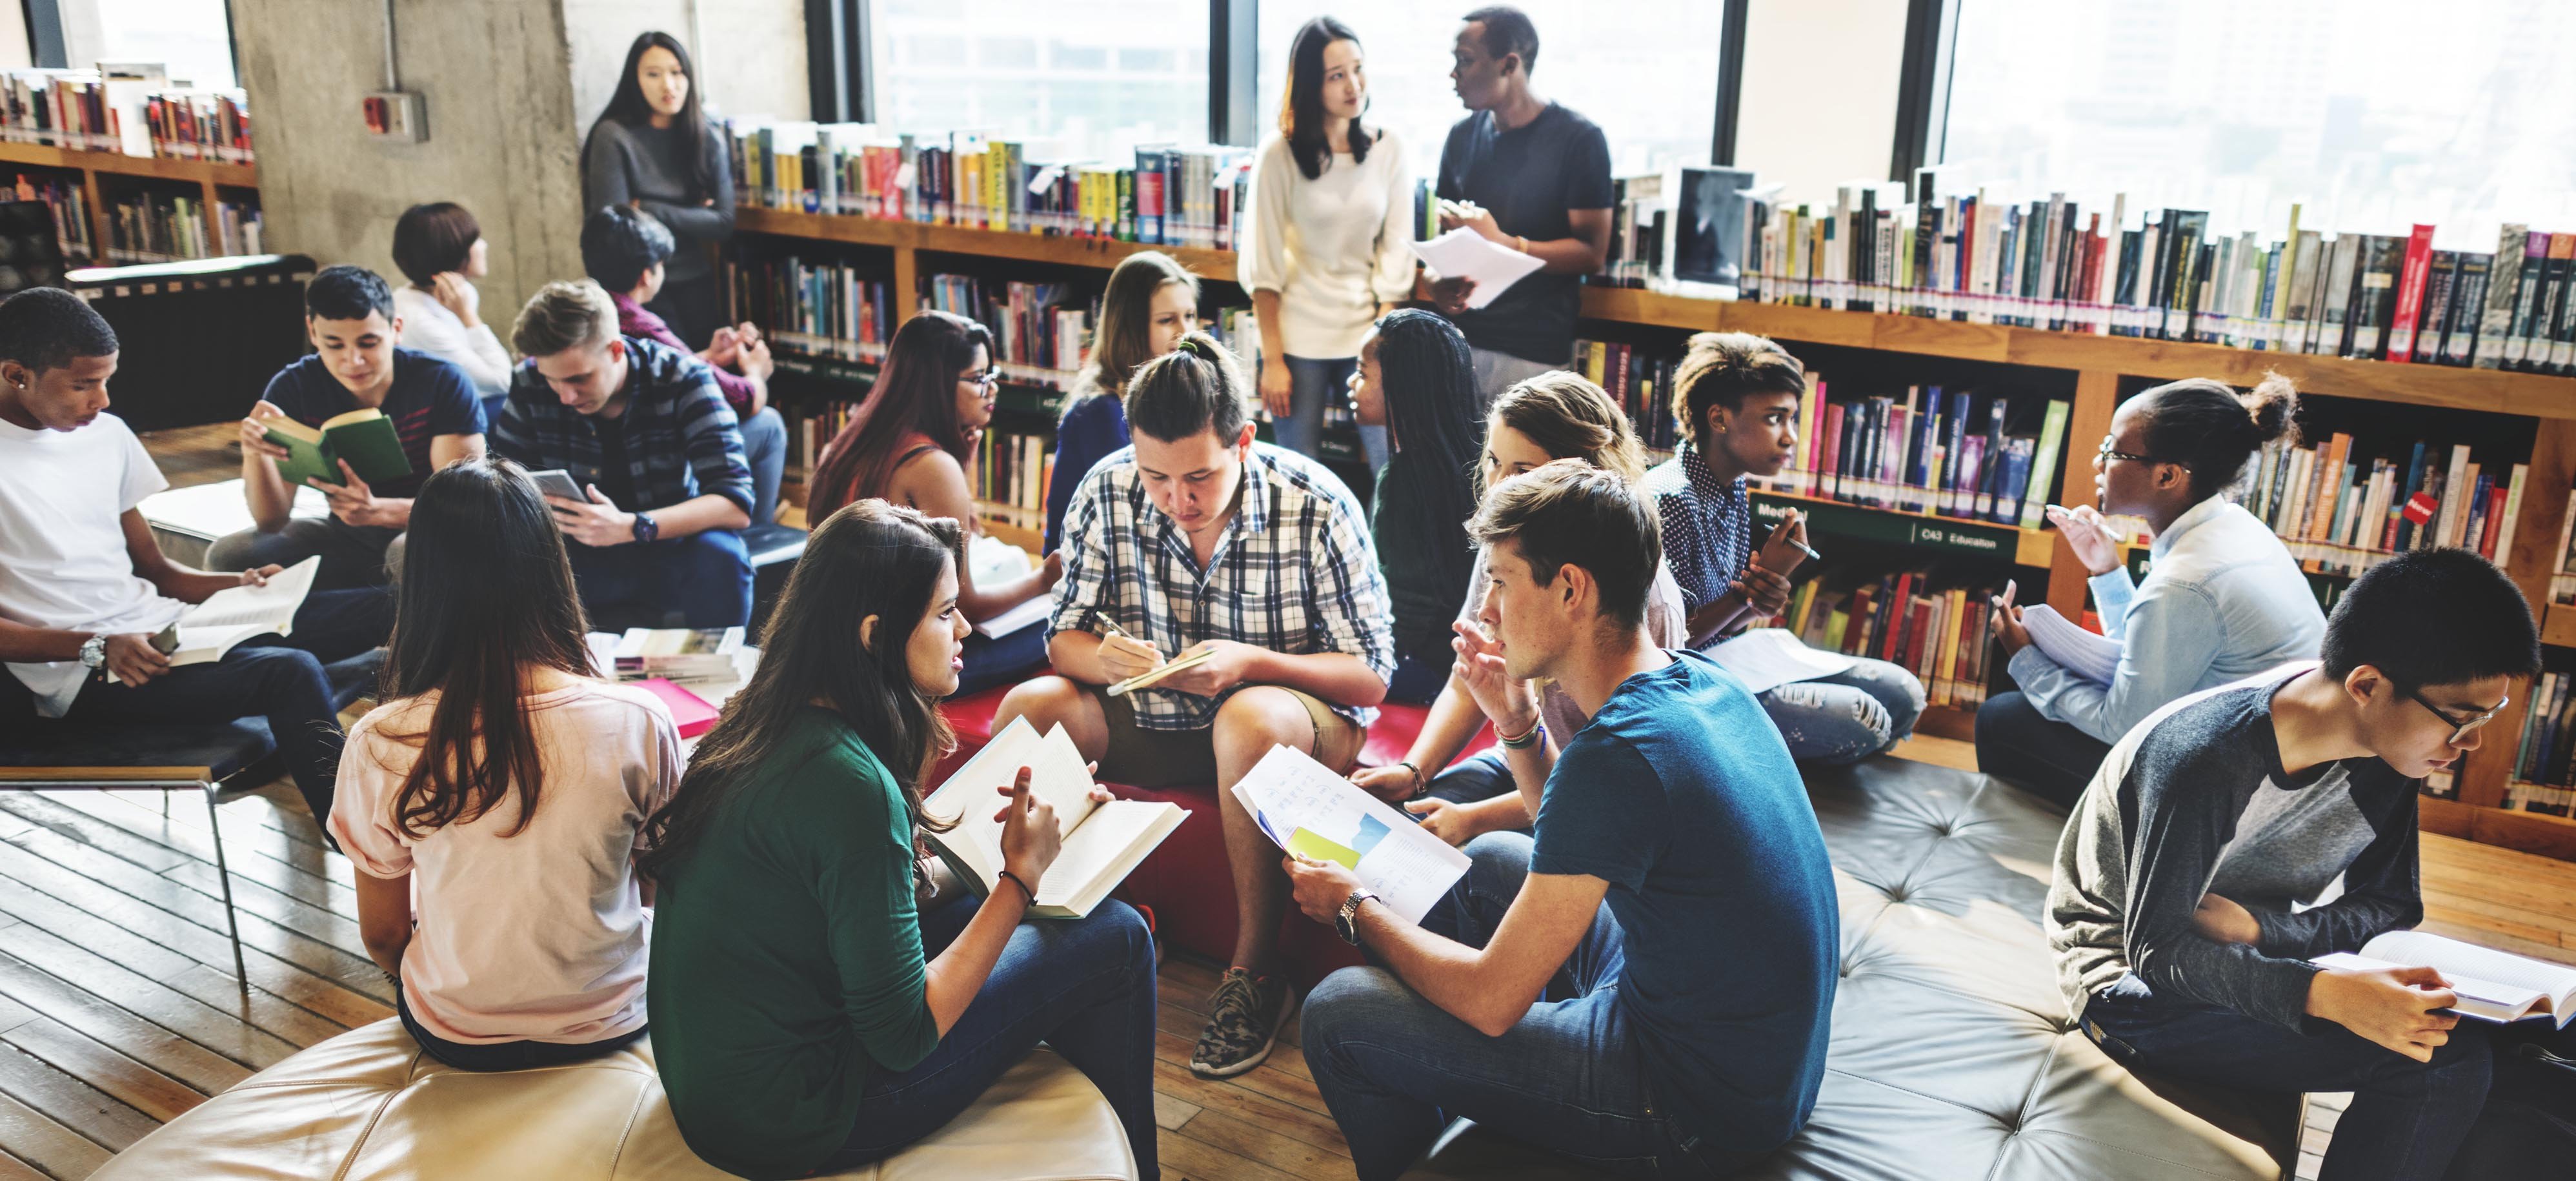 group of college students gathered in library studying together